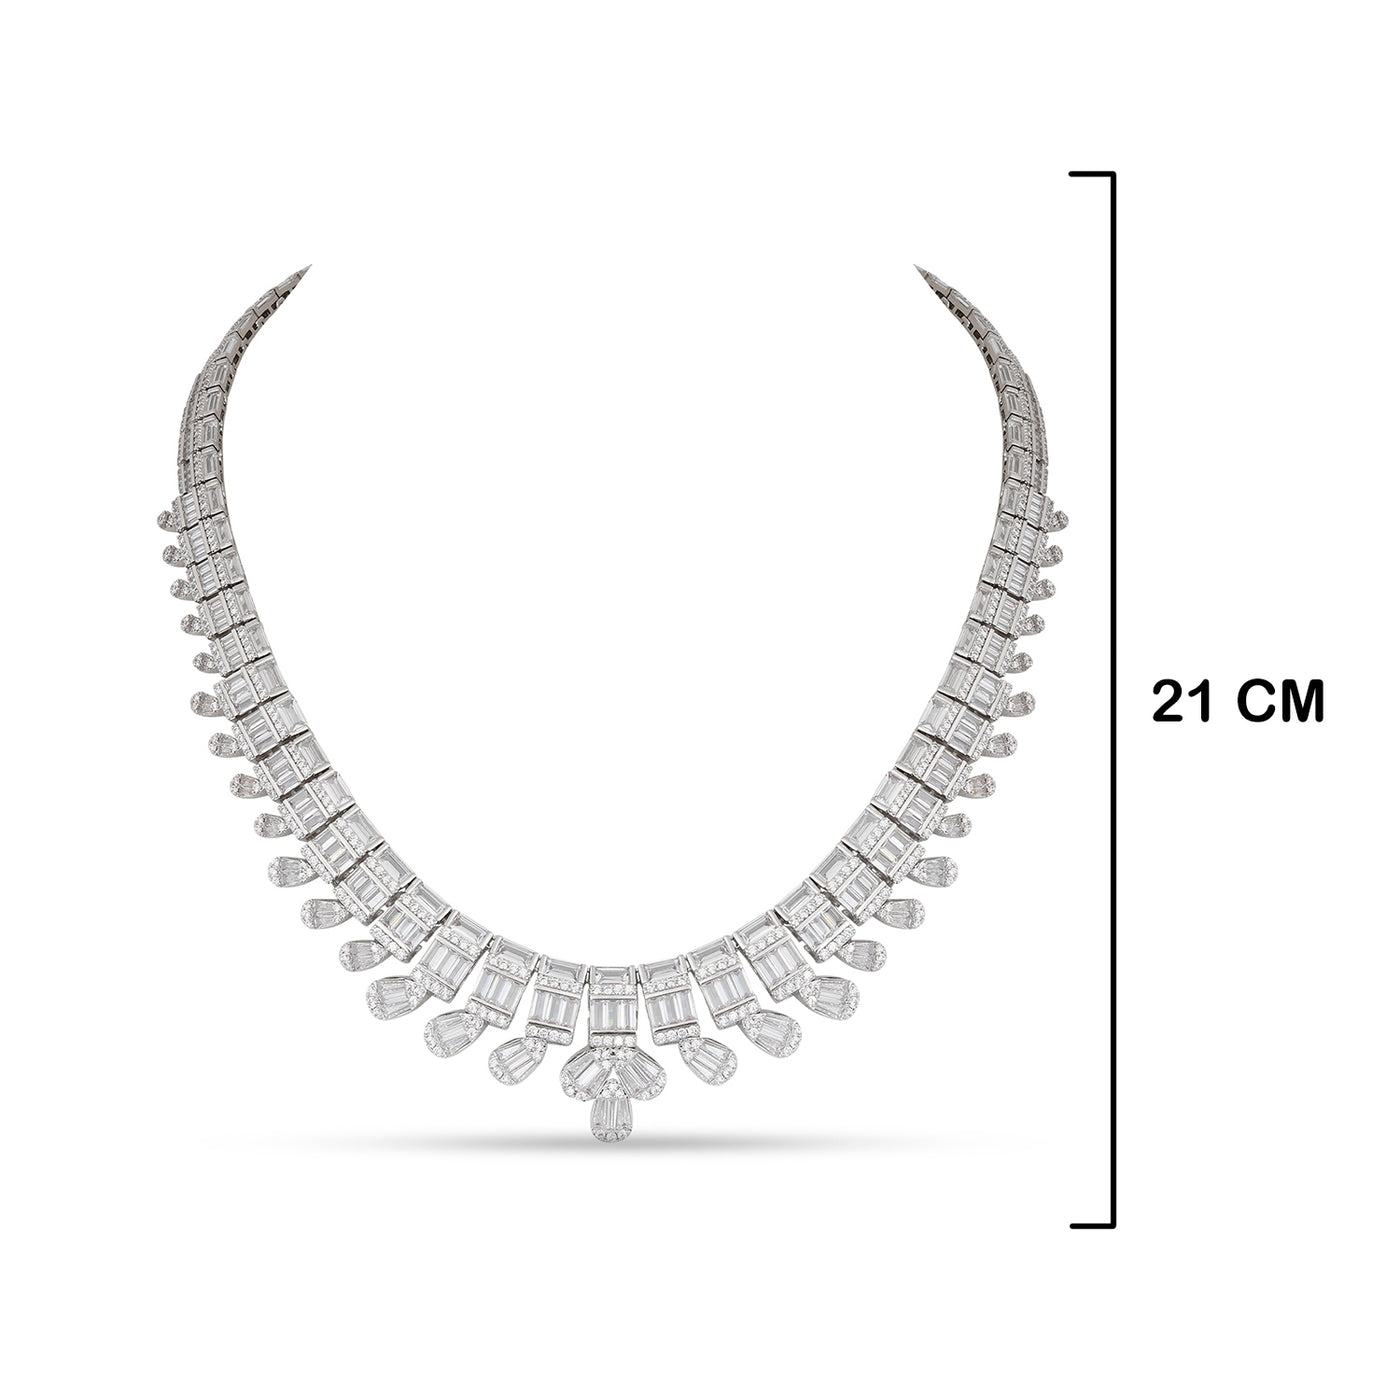 American Diamond Studded CZ Necklace with measurements in cm. 21cm.